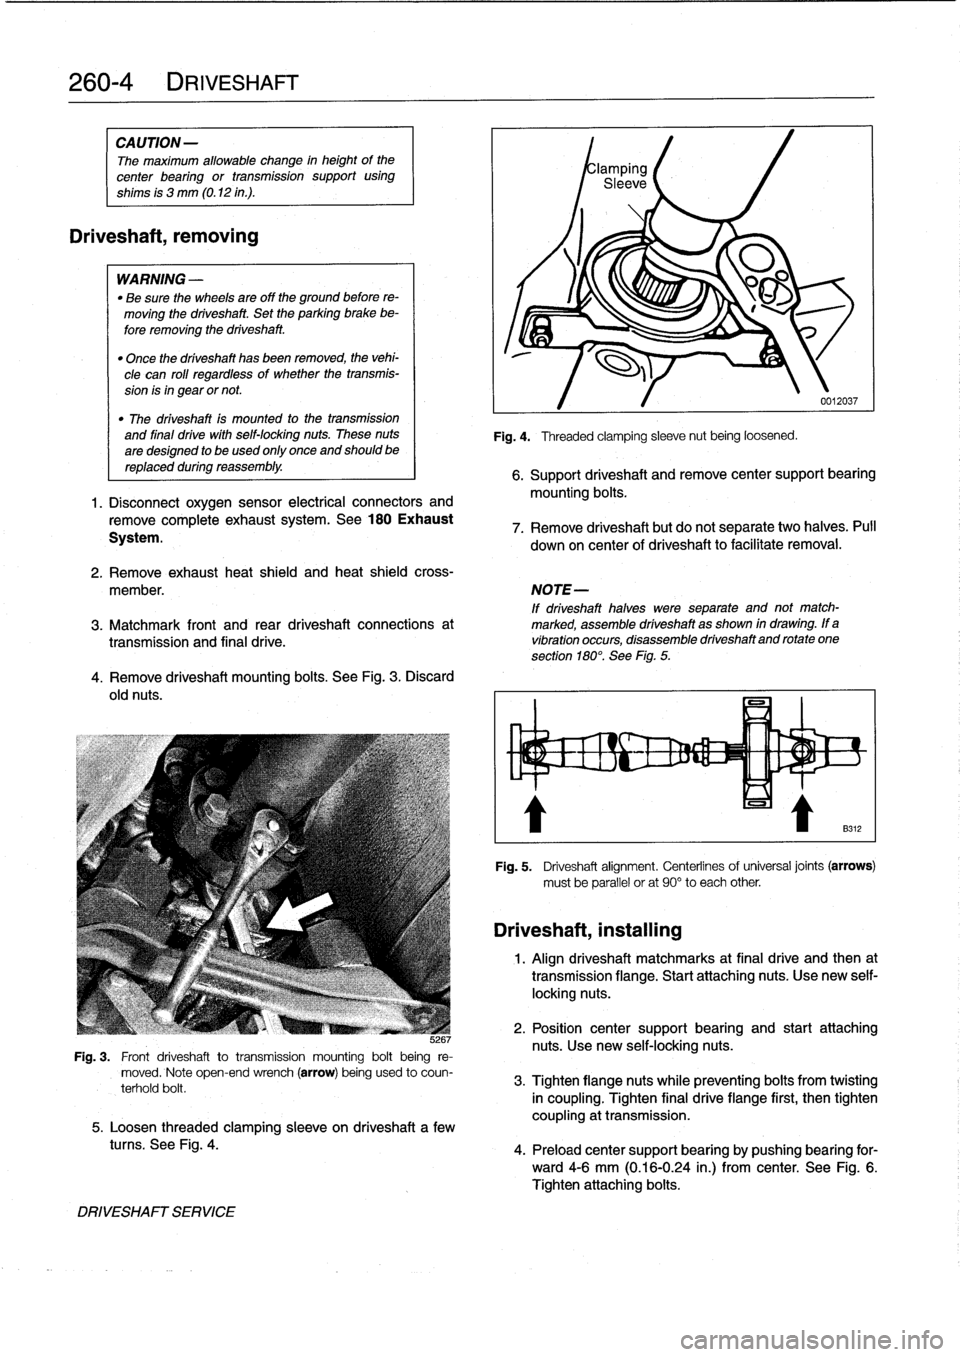 BMW 323i 1995 E36 Workshop Manual 
260-
4
DRIVESHAFT

CAUTION
-

The
maximum
allowable
change
in
height
of
the

center
bearing
or
transmission
support
using

shims
is
3
mm
(0
.12
in
.)
.

Driveshaft,
removing

WARNING
-

"
Be
sure
the